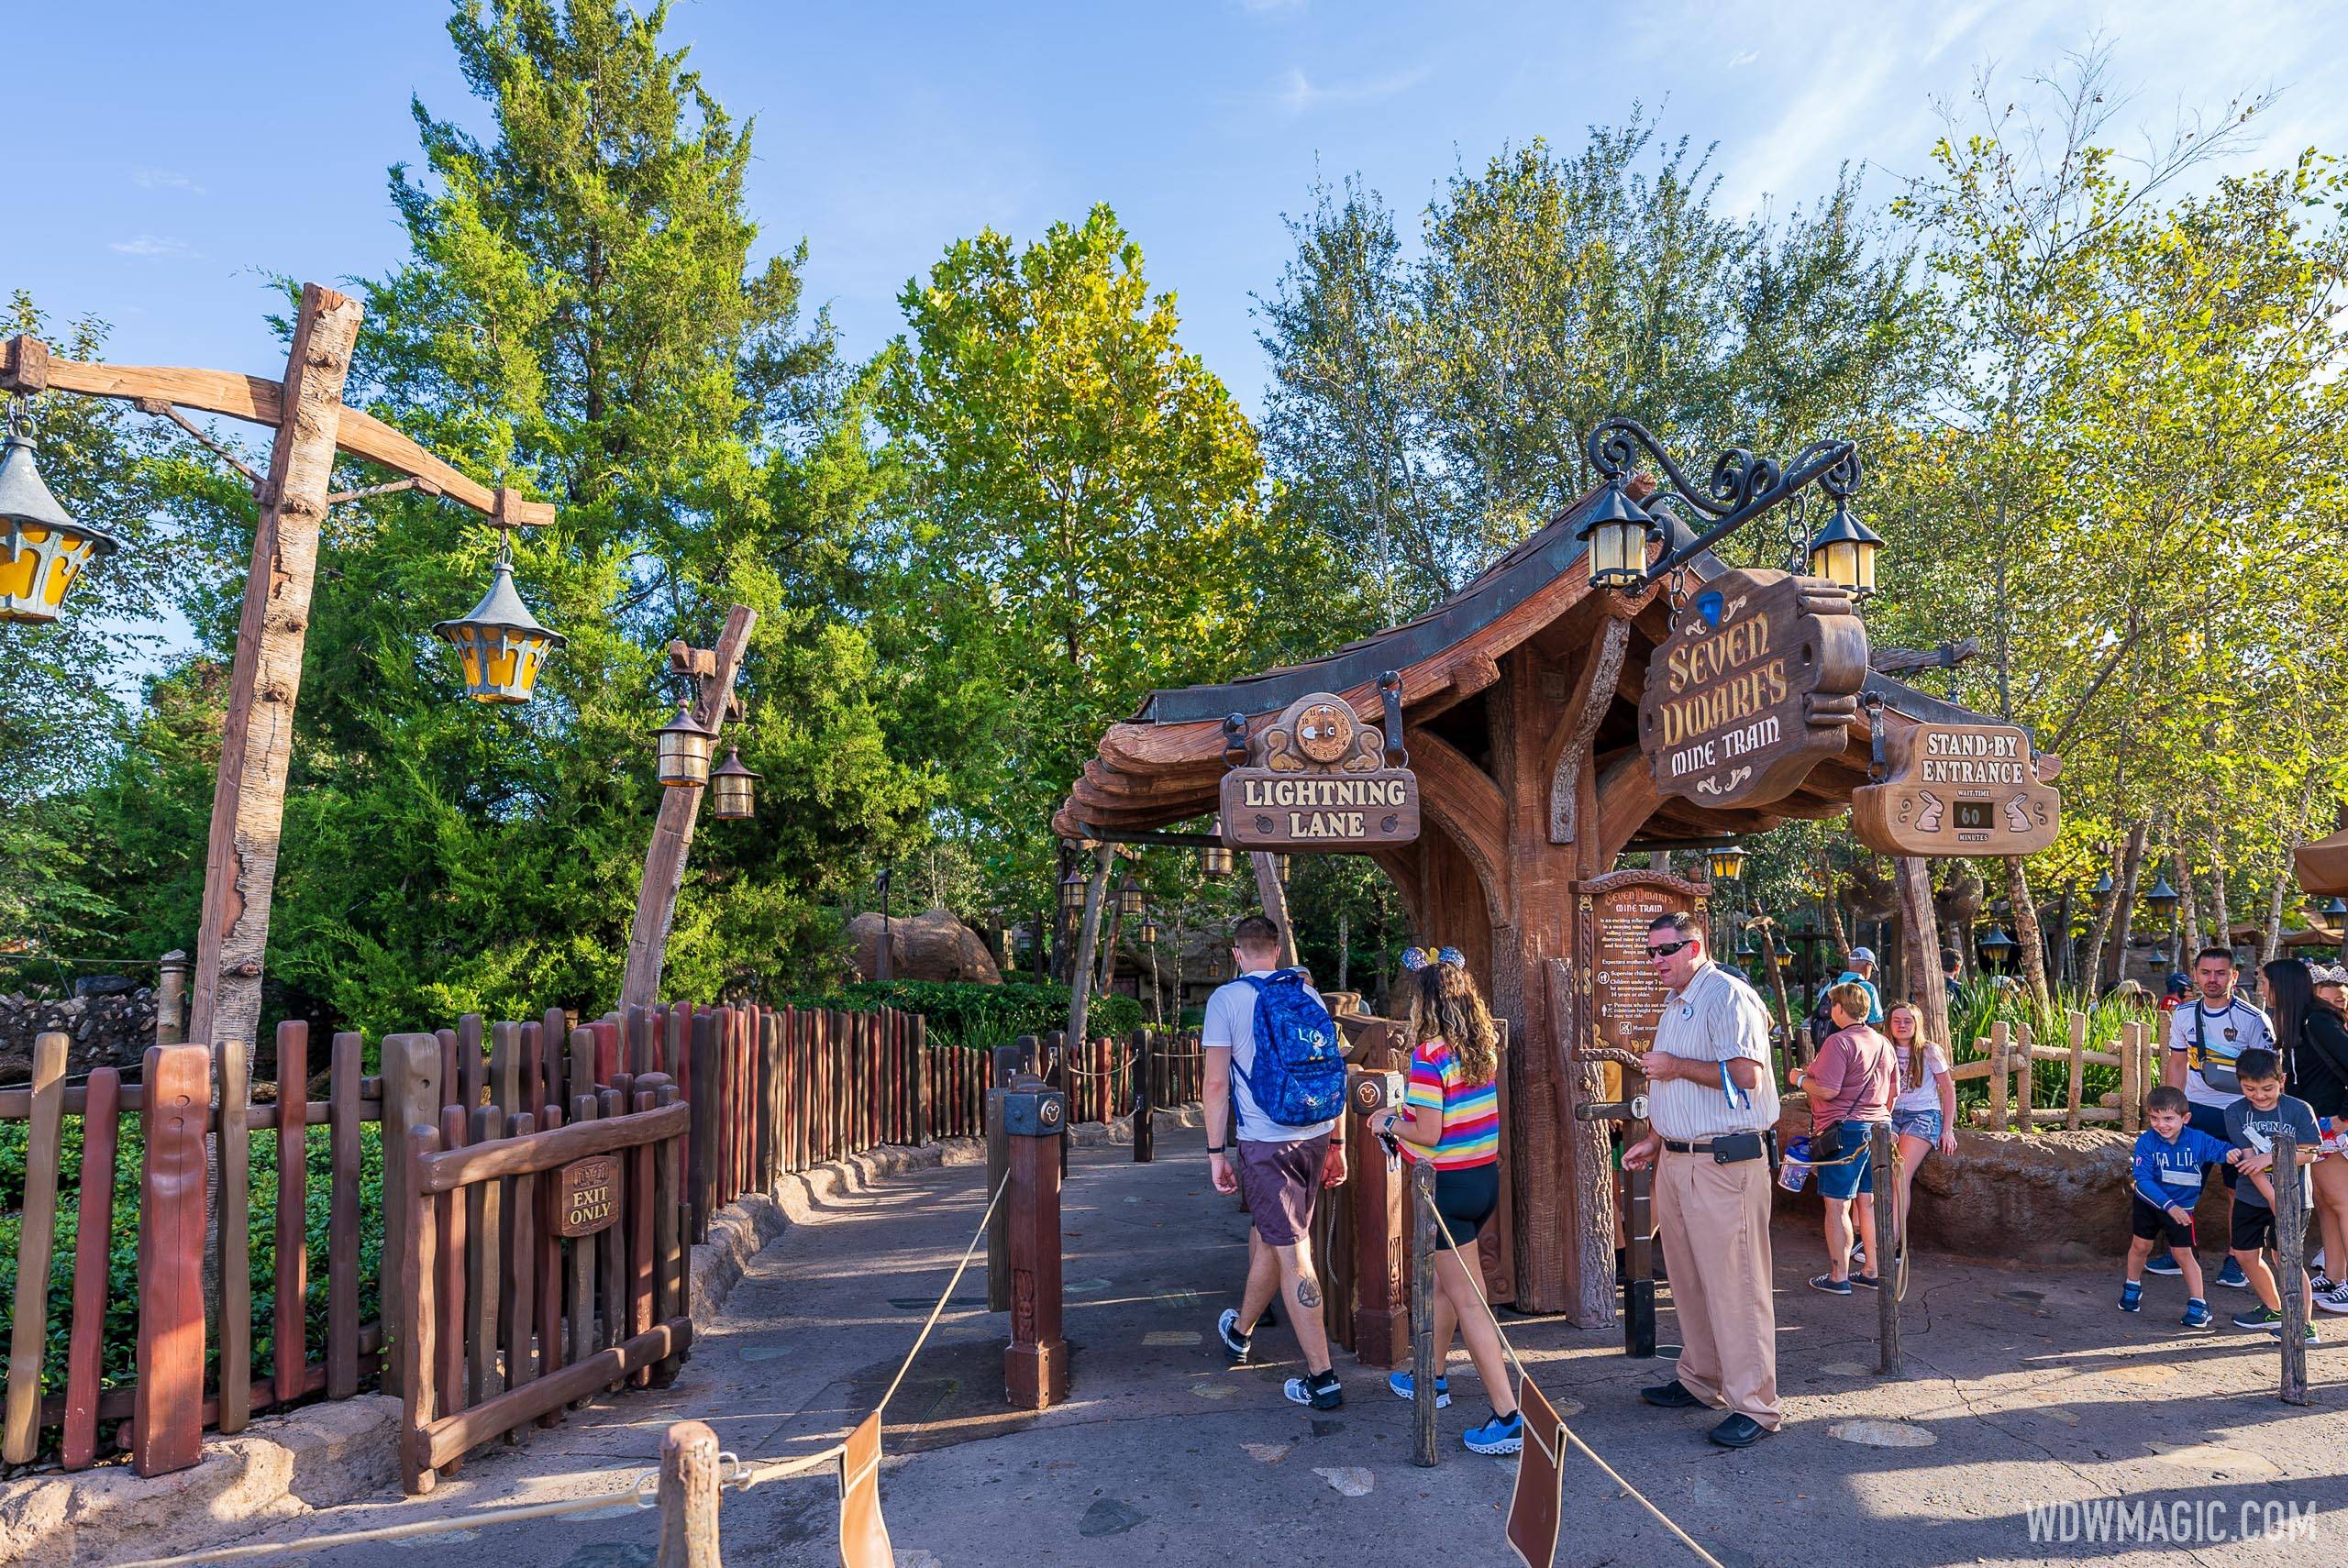 Seven Dwarfs Mine Train has increased by $2 on Friday